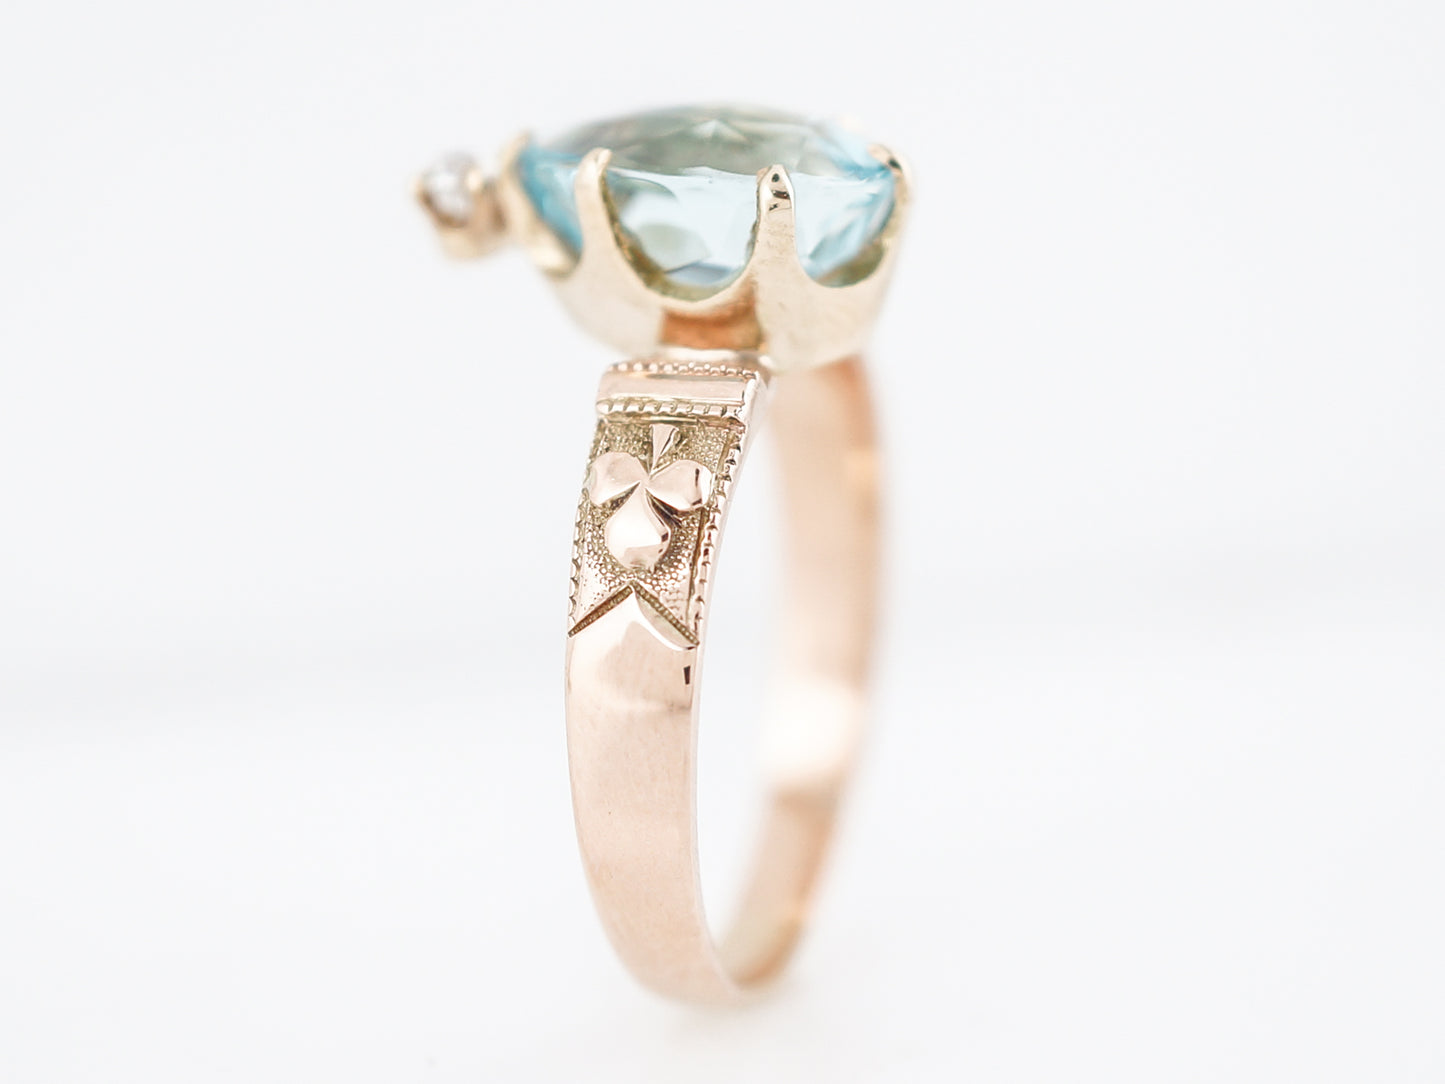 Antique Right Hand Ring Victorian 1.80 Pear Cut Aquamarine in 14k Yellow Gold